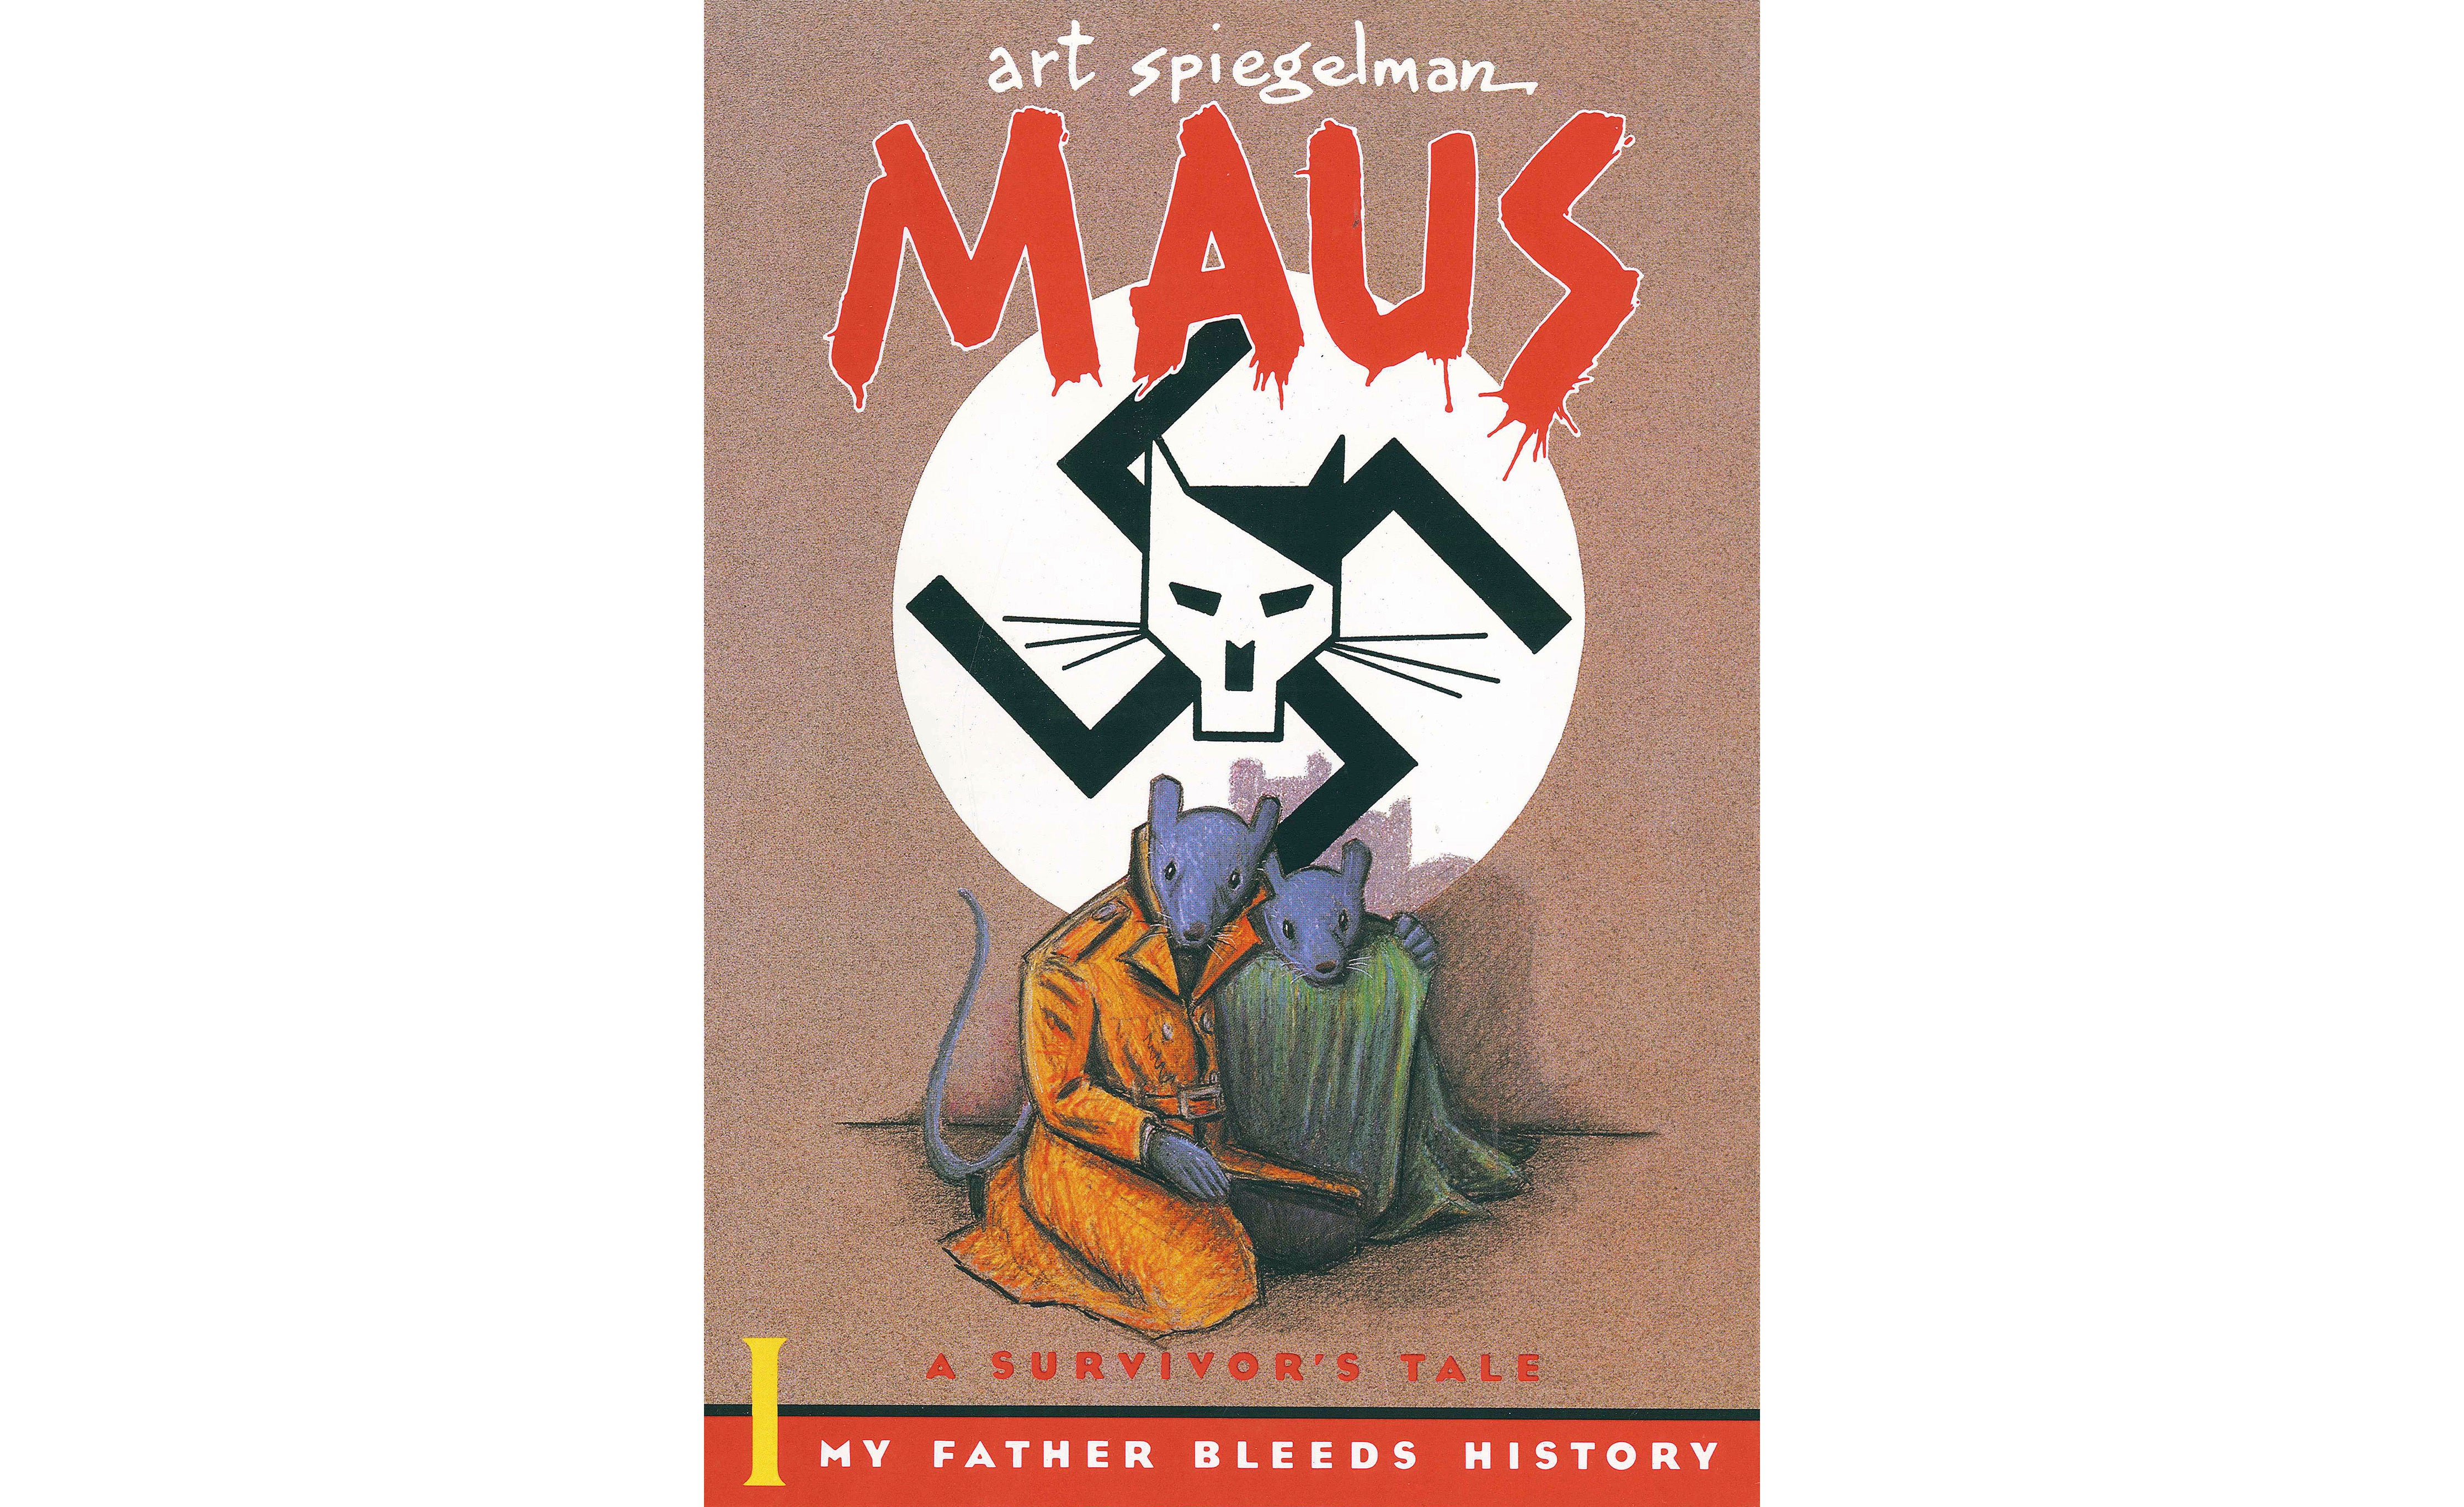 'Maus' book about the Holocaust banned in Tennessee school district: report